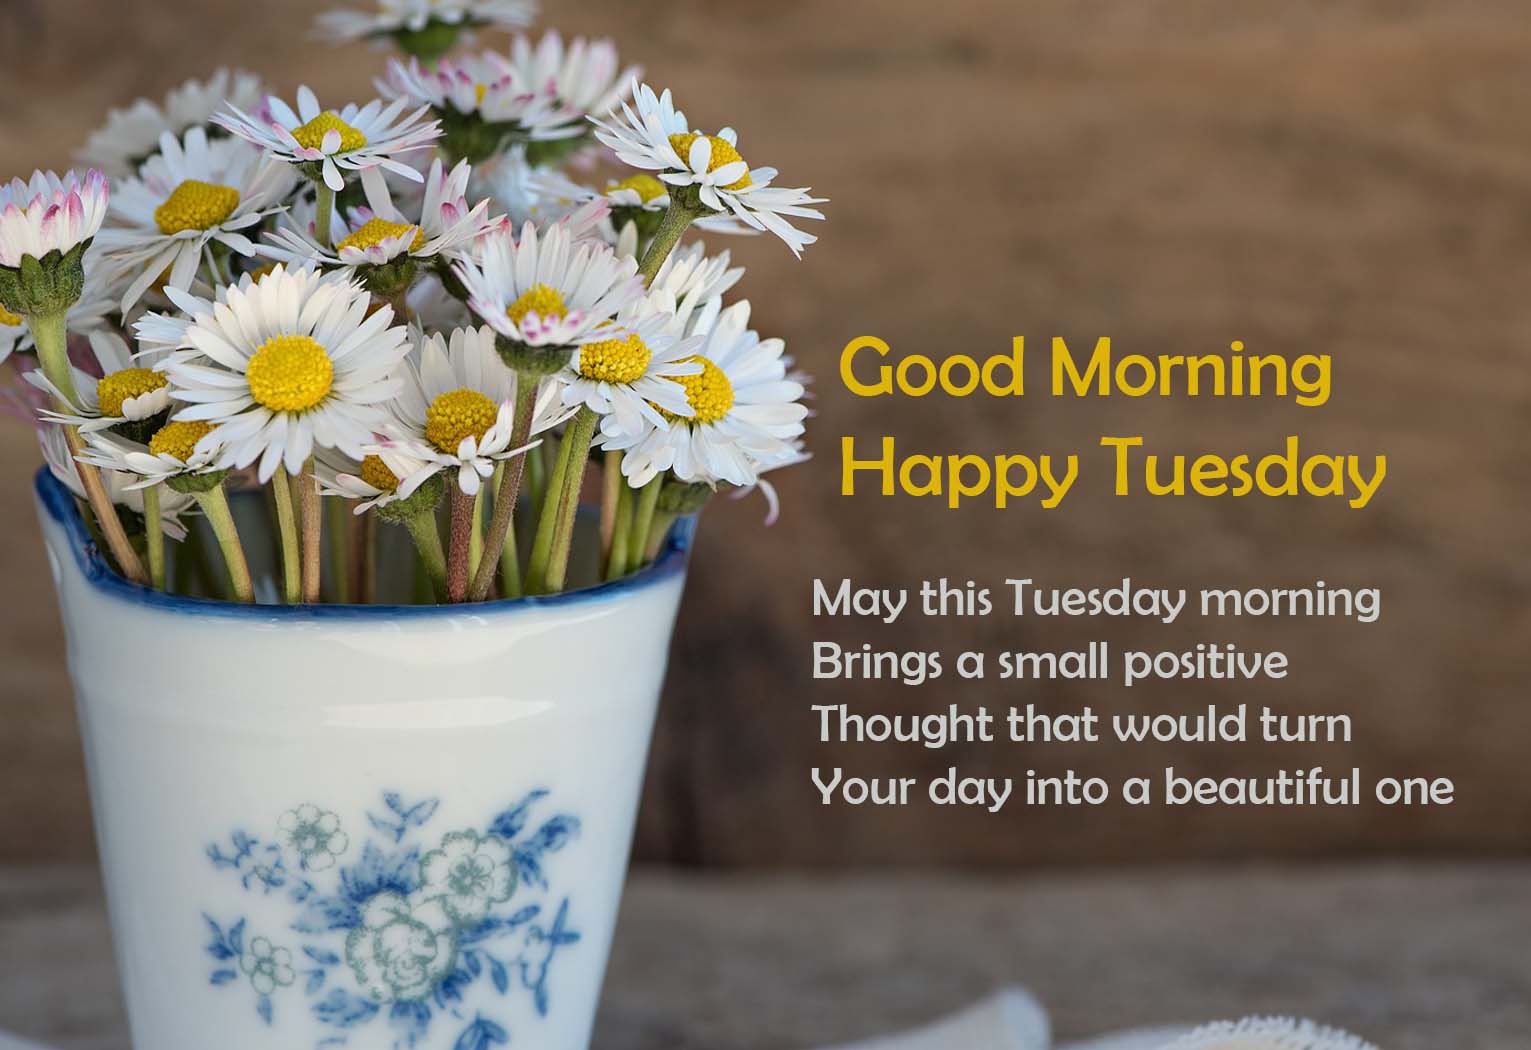 Good Morning Happy Tuesday Wishes Images